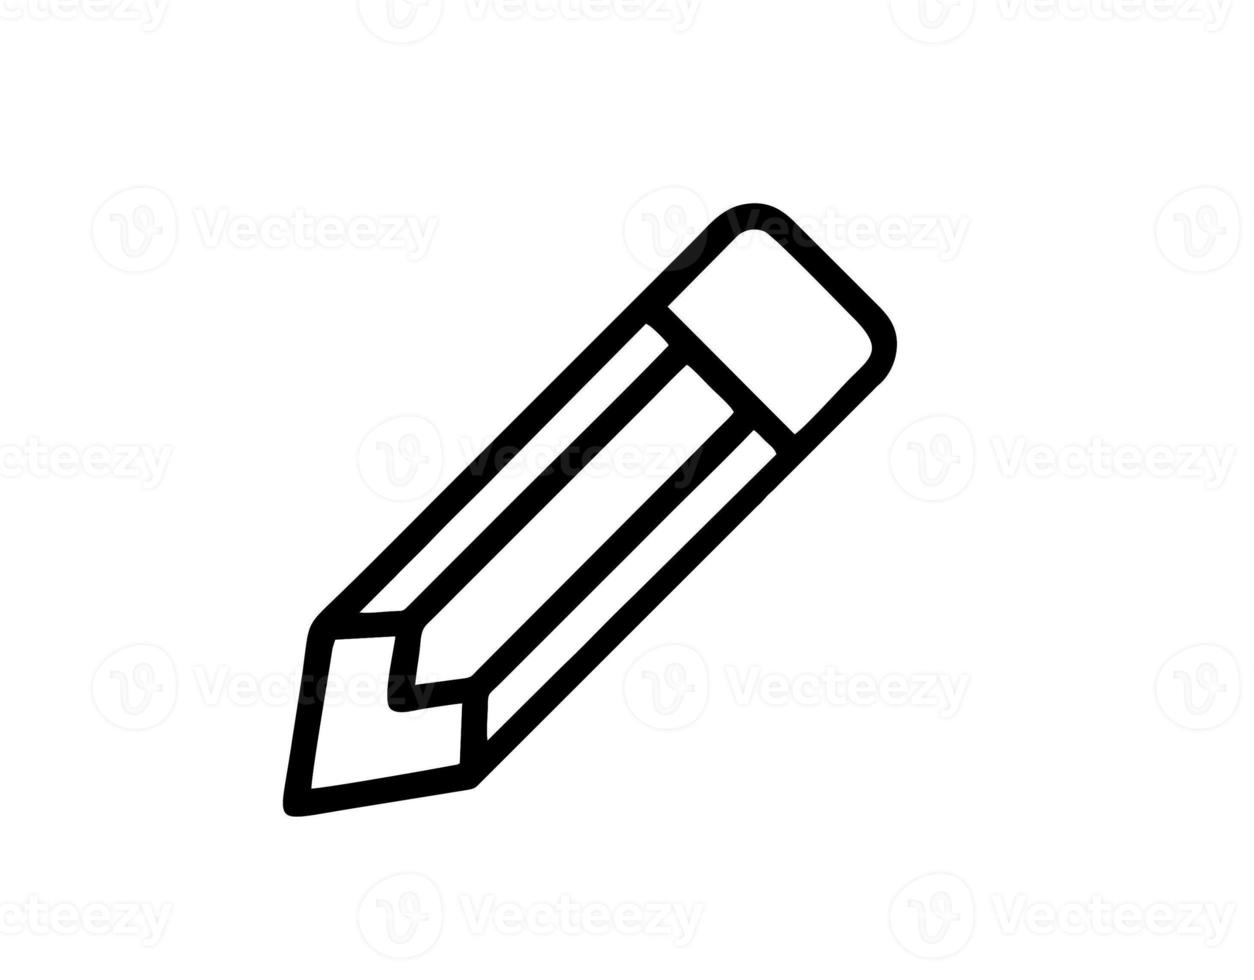 pencil icon in black vector image, illustration of pencil in black on white background, a pen design on a white background photo